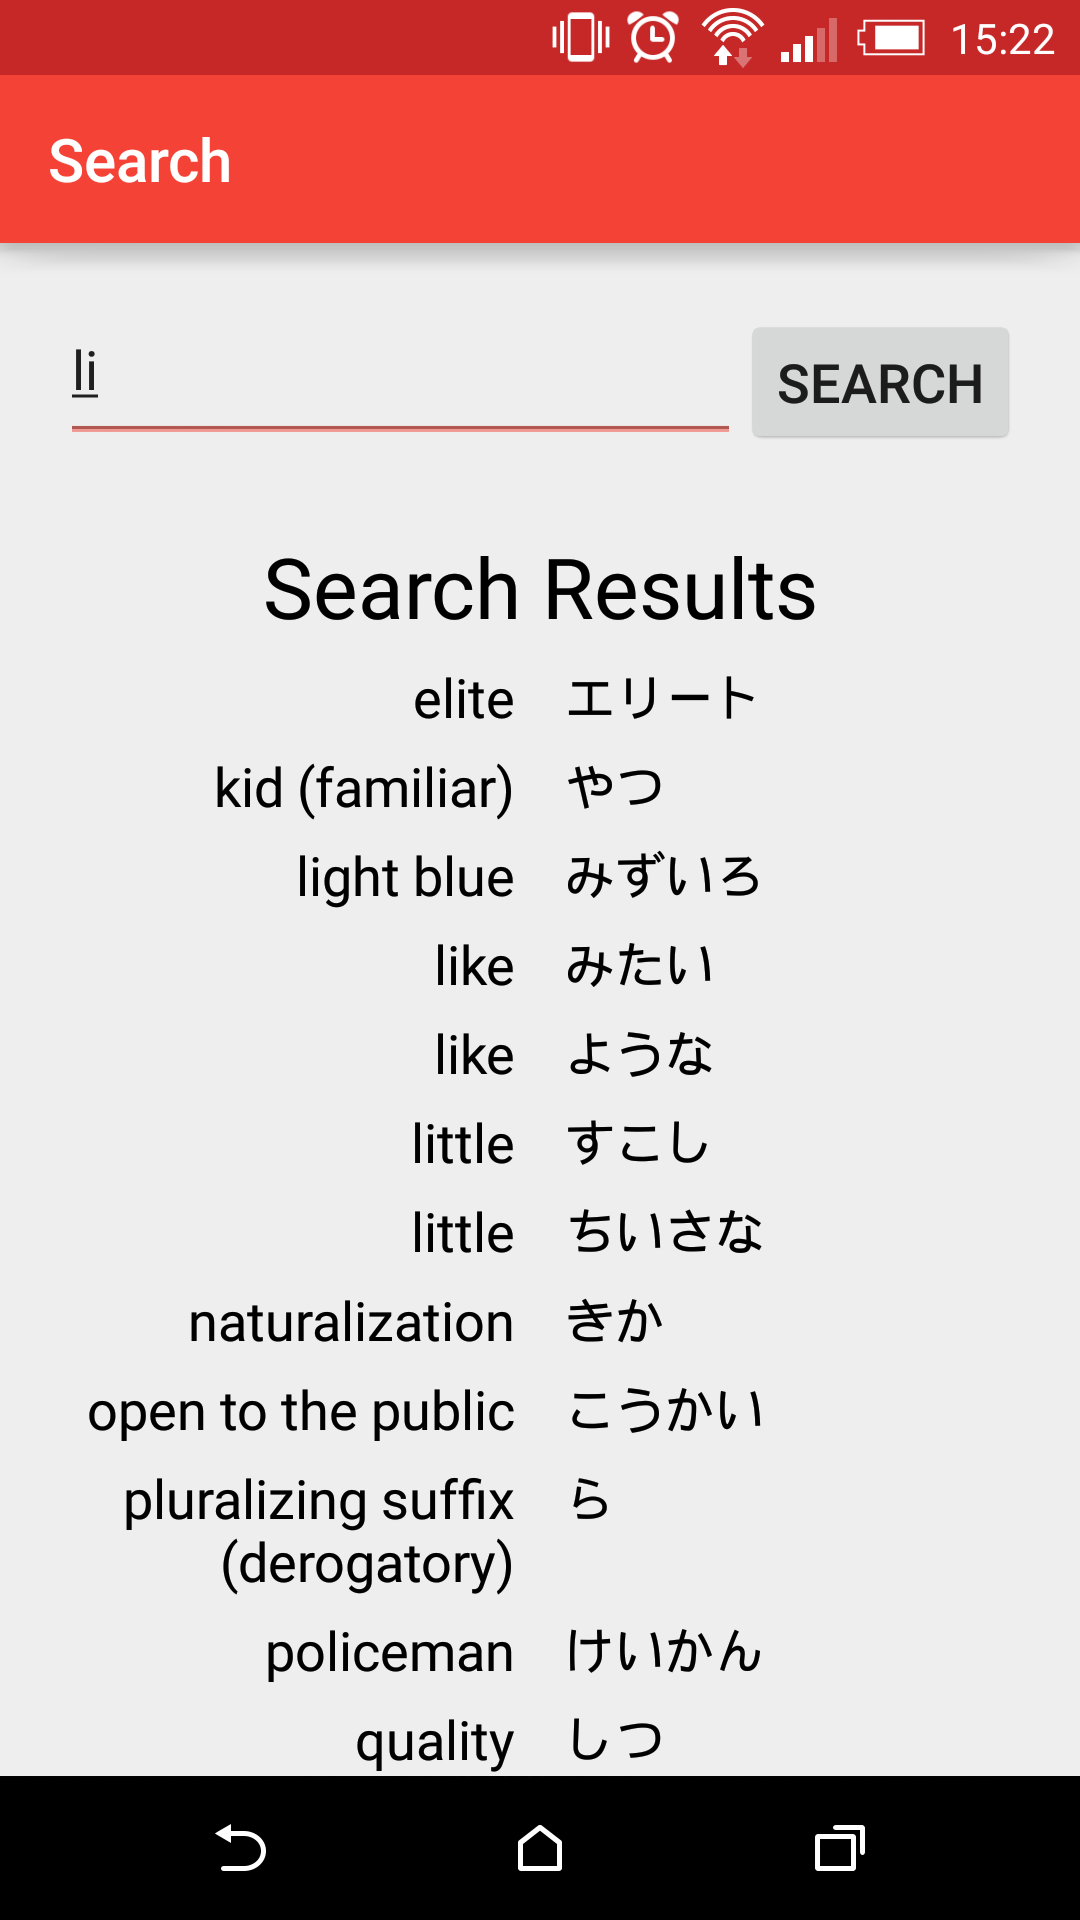 A screenshot of the search screen of the app